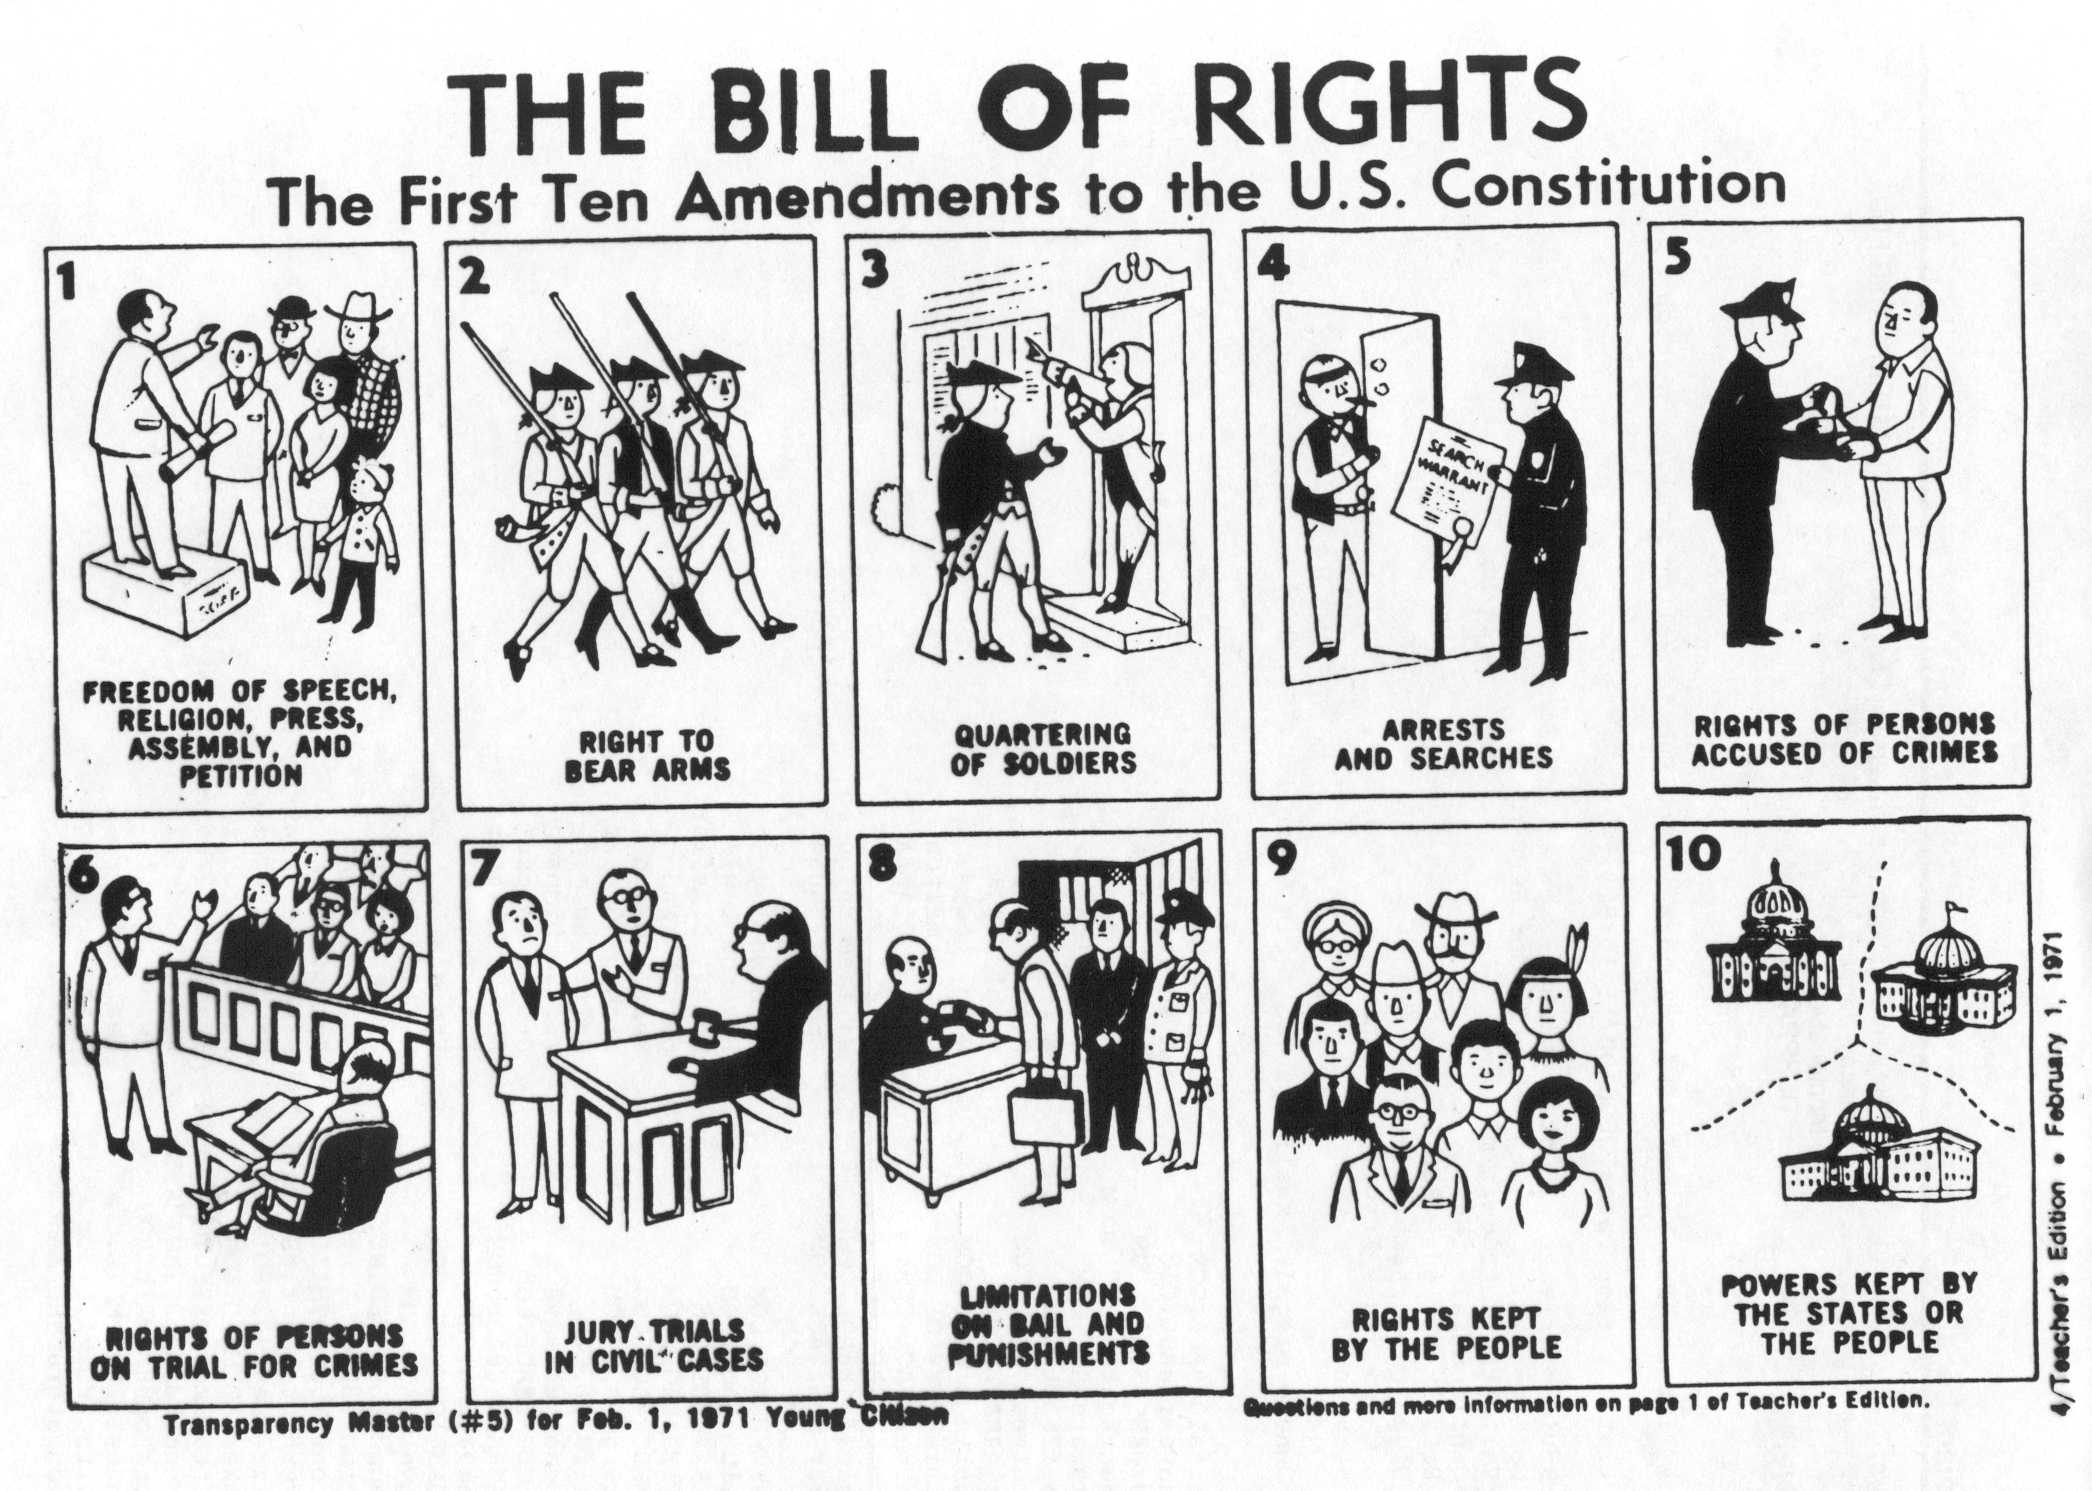 Know Your Rights!